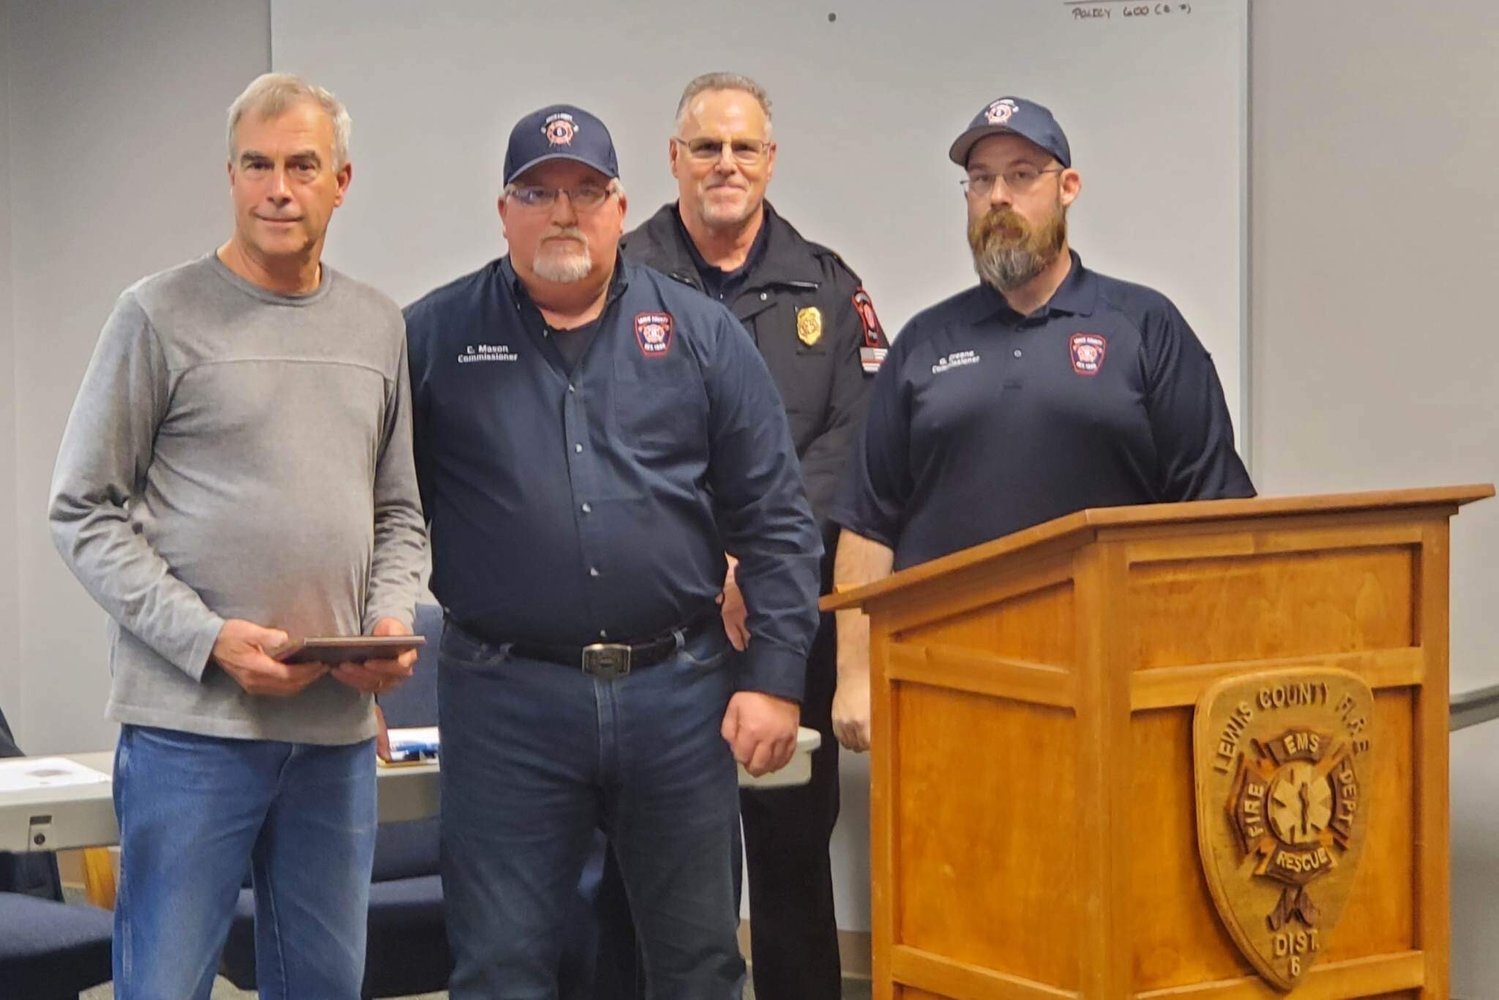 Board Chair Colin Mason presented a service award to Kevin Curfman, who retired as a volunteer firefighter with the district. Curfman retired from Chehalis Fire Department as a fire captain and volunteered with Lewis County Fire District 6. “While with Lewis County Fire District 6, Curfman was a dedicated volunteer who served the district and the community in many areas,” said the district. Curfman retired as a volunteer firefighter after 35 years of service. From left are Curfman, Board Chair Colin Mason, Fire Chief Ken Cardinale and Commissioner Greg Greene.